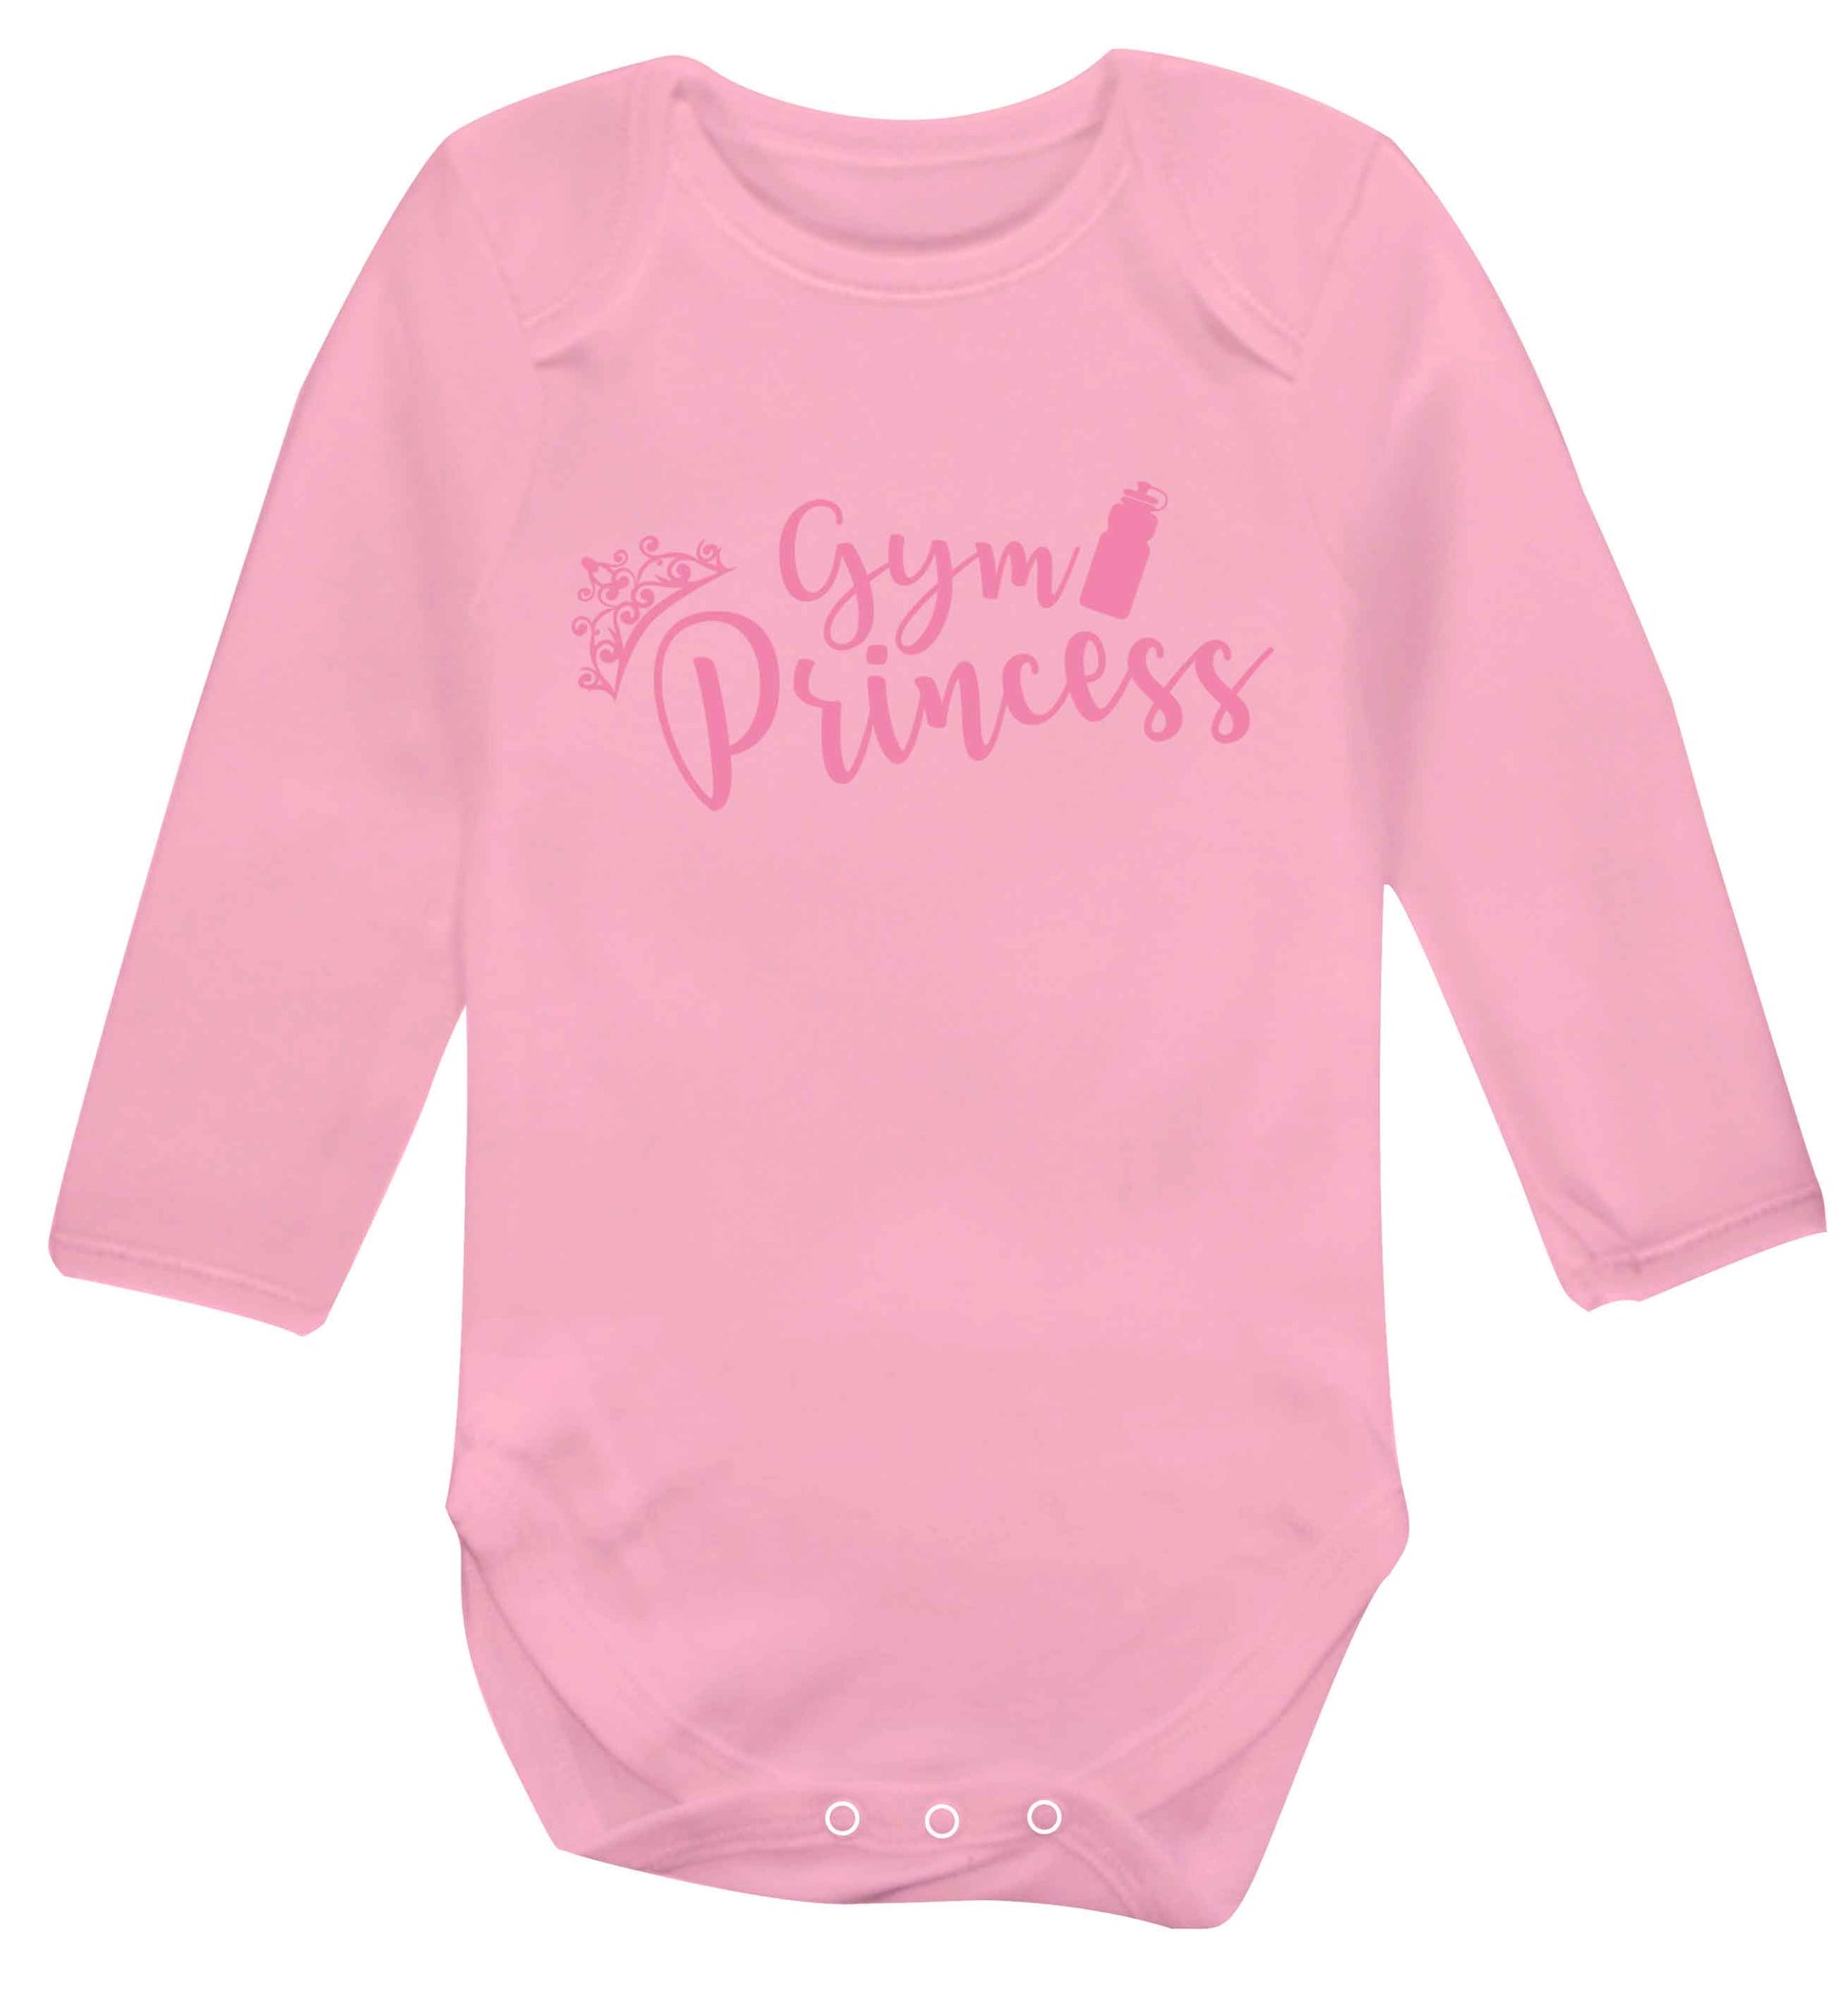 Gym princess Baby Vest long sleeved pale pink 6-12 months